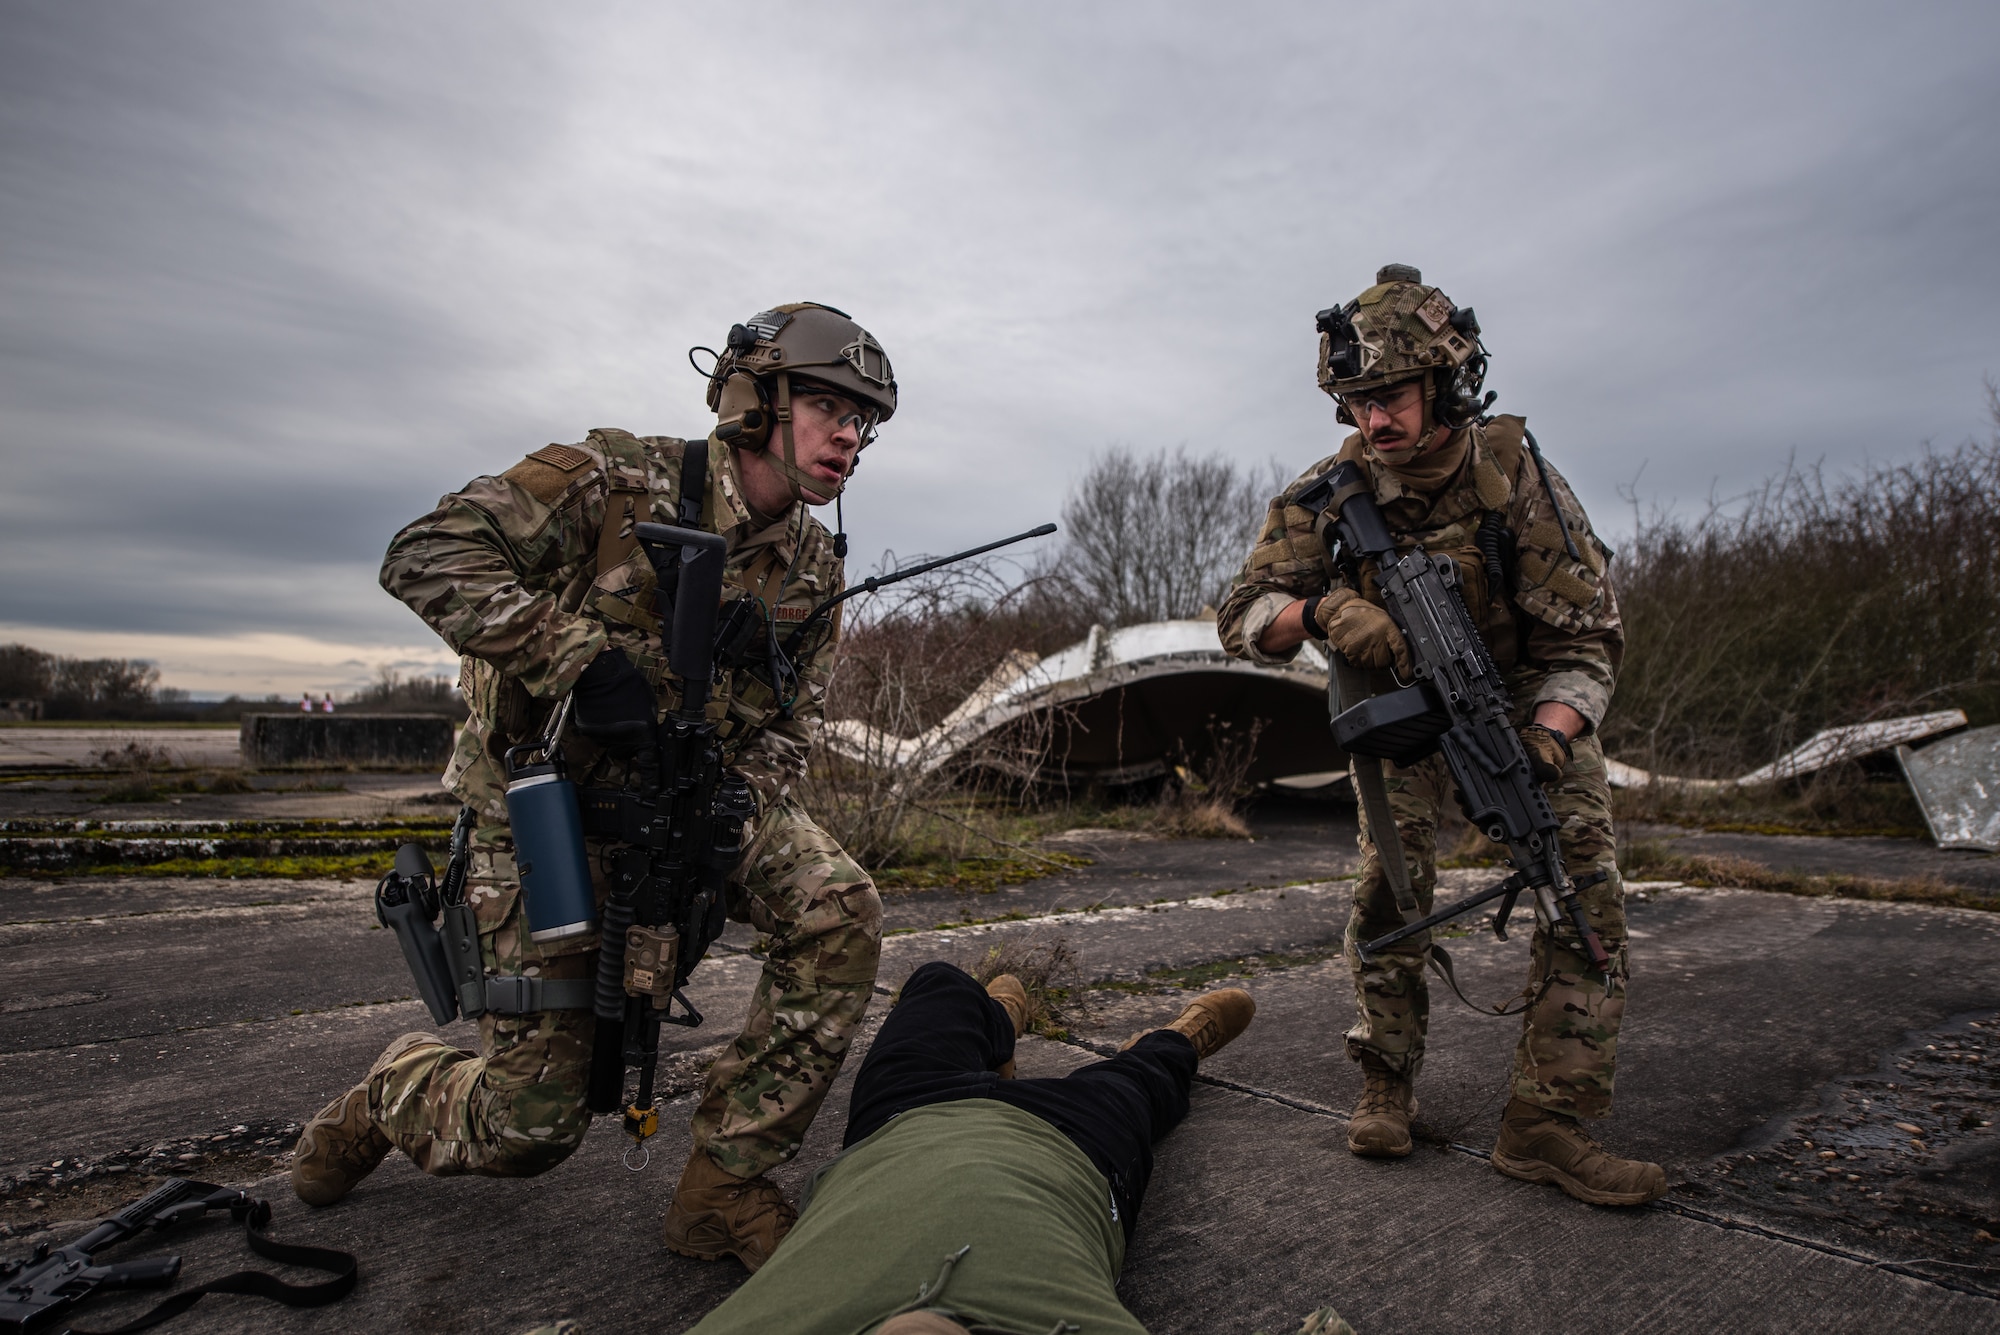 U.S. Air Force Staff Sgt. Dillion Rickman, 435th Security Forces Squadron vehicle maintainer, left, and Staff Sgt. Dwight Stalter, 435th SFS contingency response team leader, perform a body check during exercise Frozen Defender in Grostenquin, France, Jan. 14, 2020. Frozen Defender tests the squadron’s capabilities in a contested environment under harsh conditions. The 435th SFS is capable of securing areas in austere environments so their counterparts within the 435th Contingency Response Group can stand up airfields for air operations. (U.S. Air Force photo by Staff Sgt. Devin Boyer)